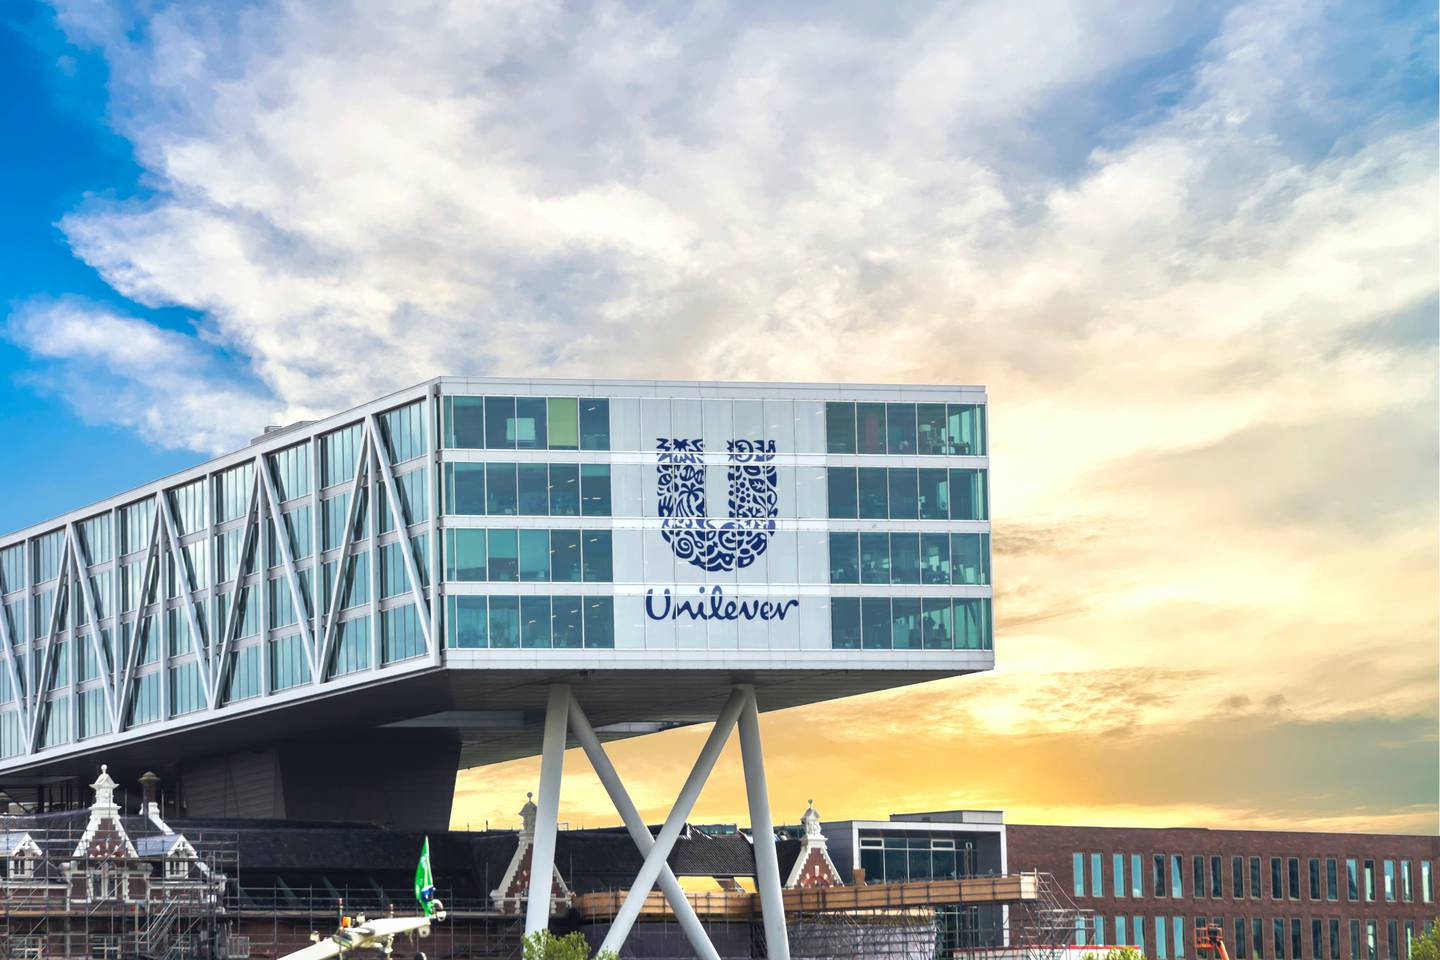 An image of Unilever's offices at dusk.